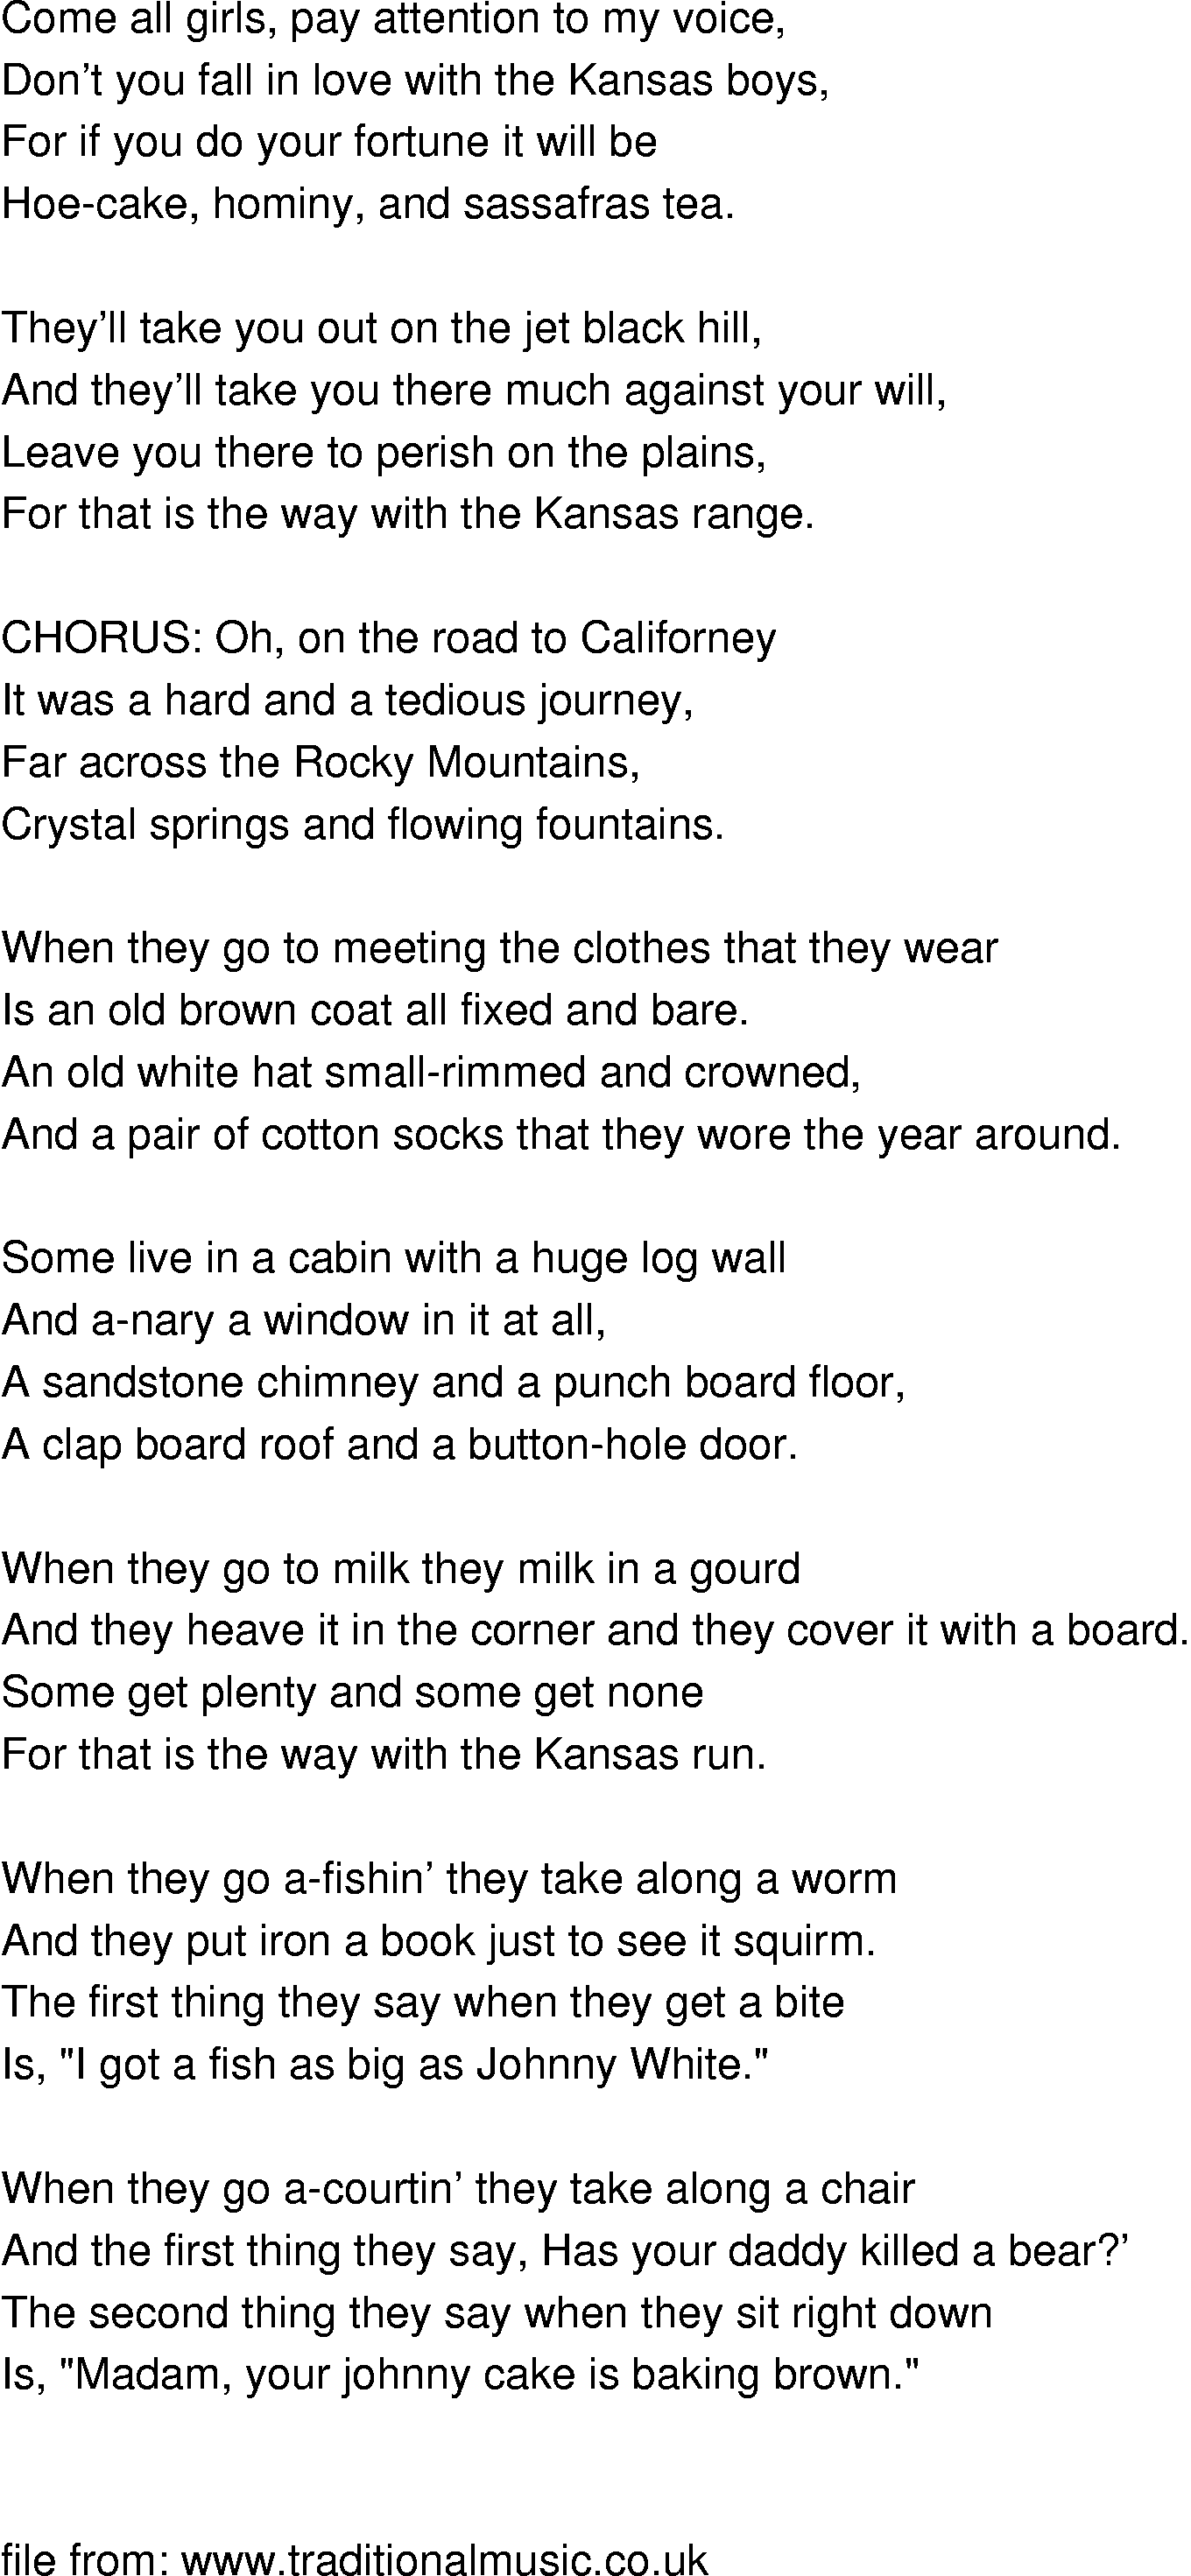 Old-Time (oldtimey) Song Lyrics - on the road to california